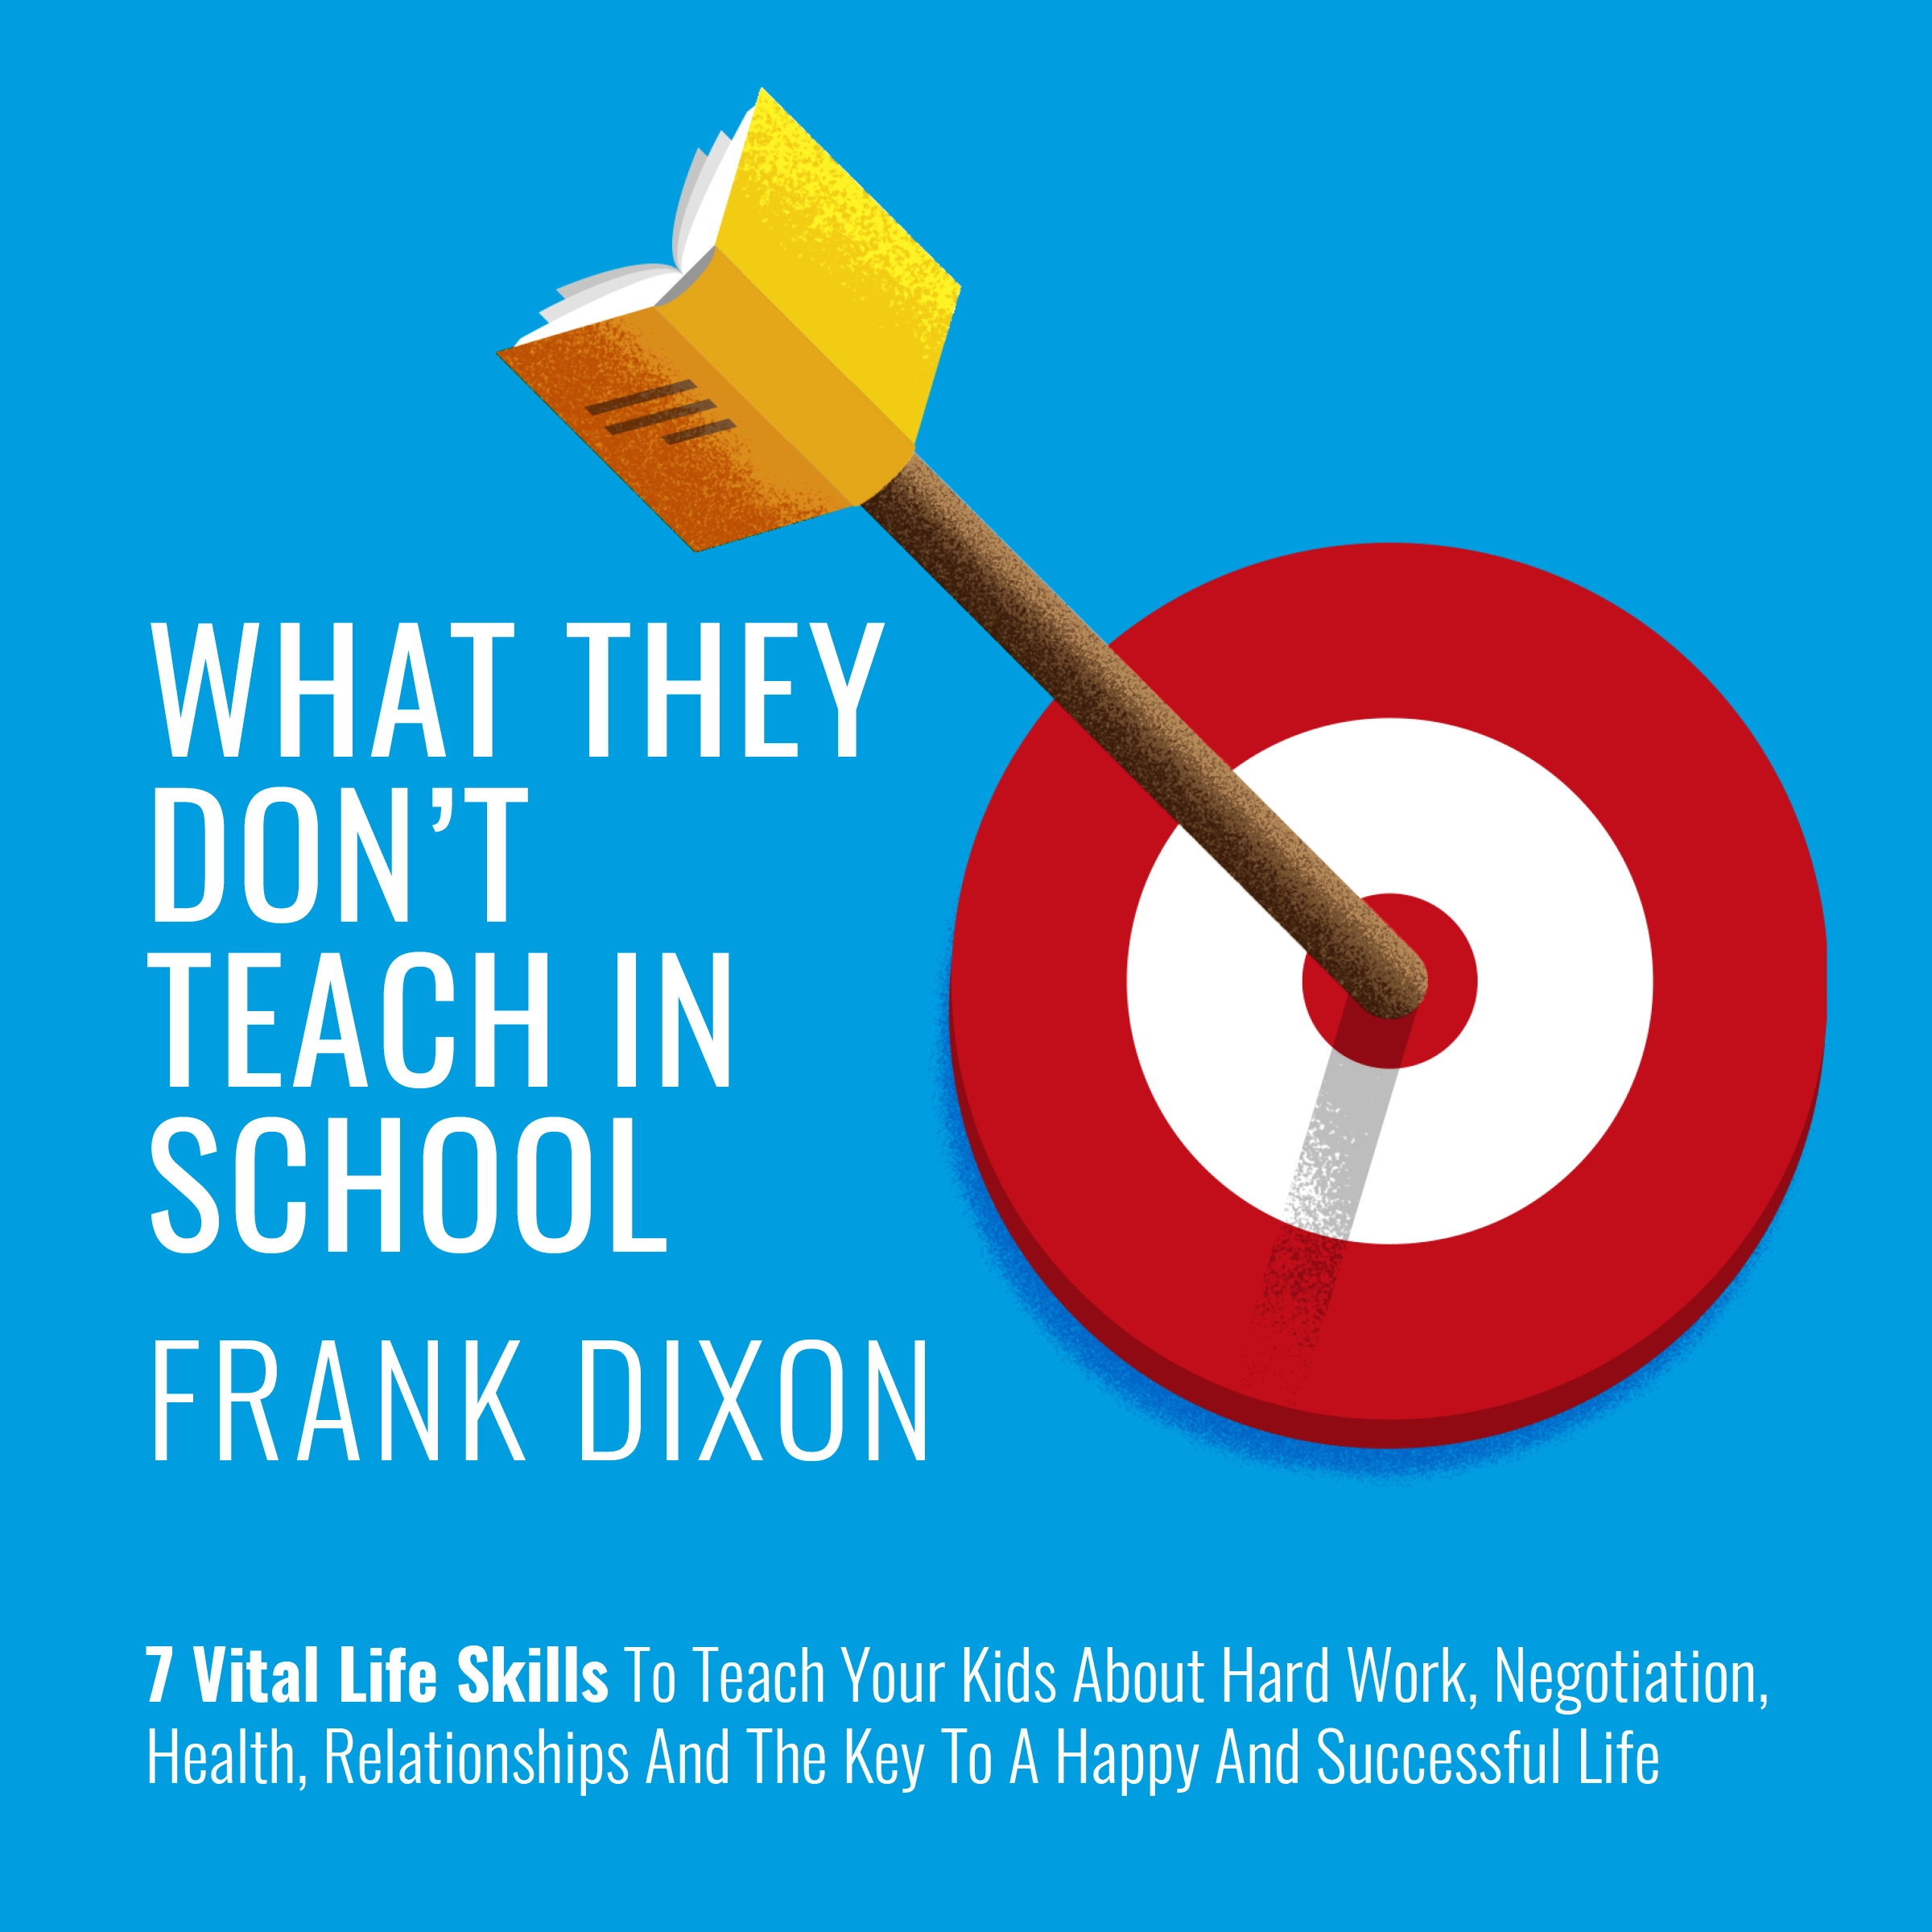 What They Don't Teach in School Audiobook by Frank Dixon